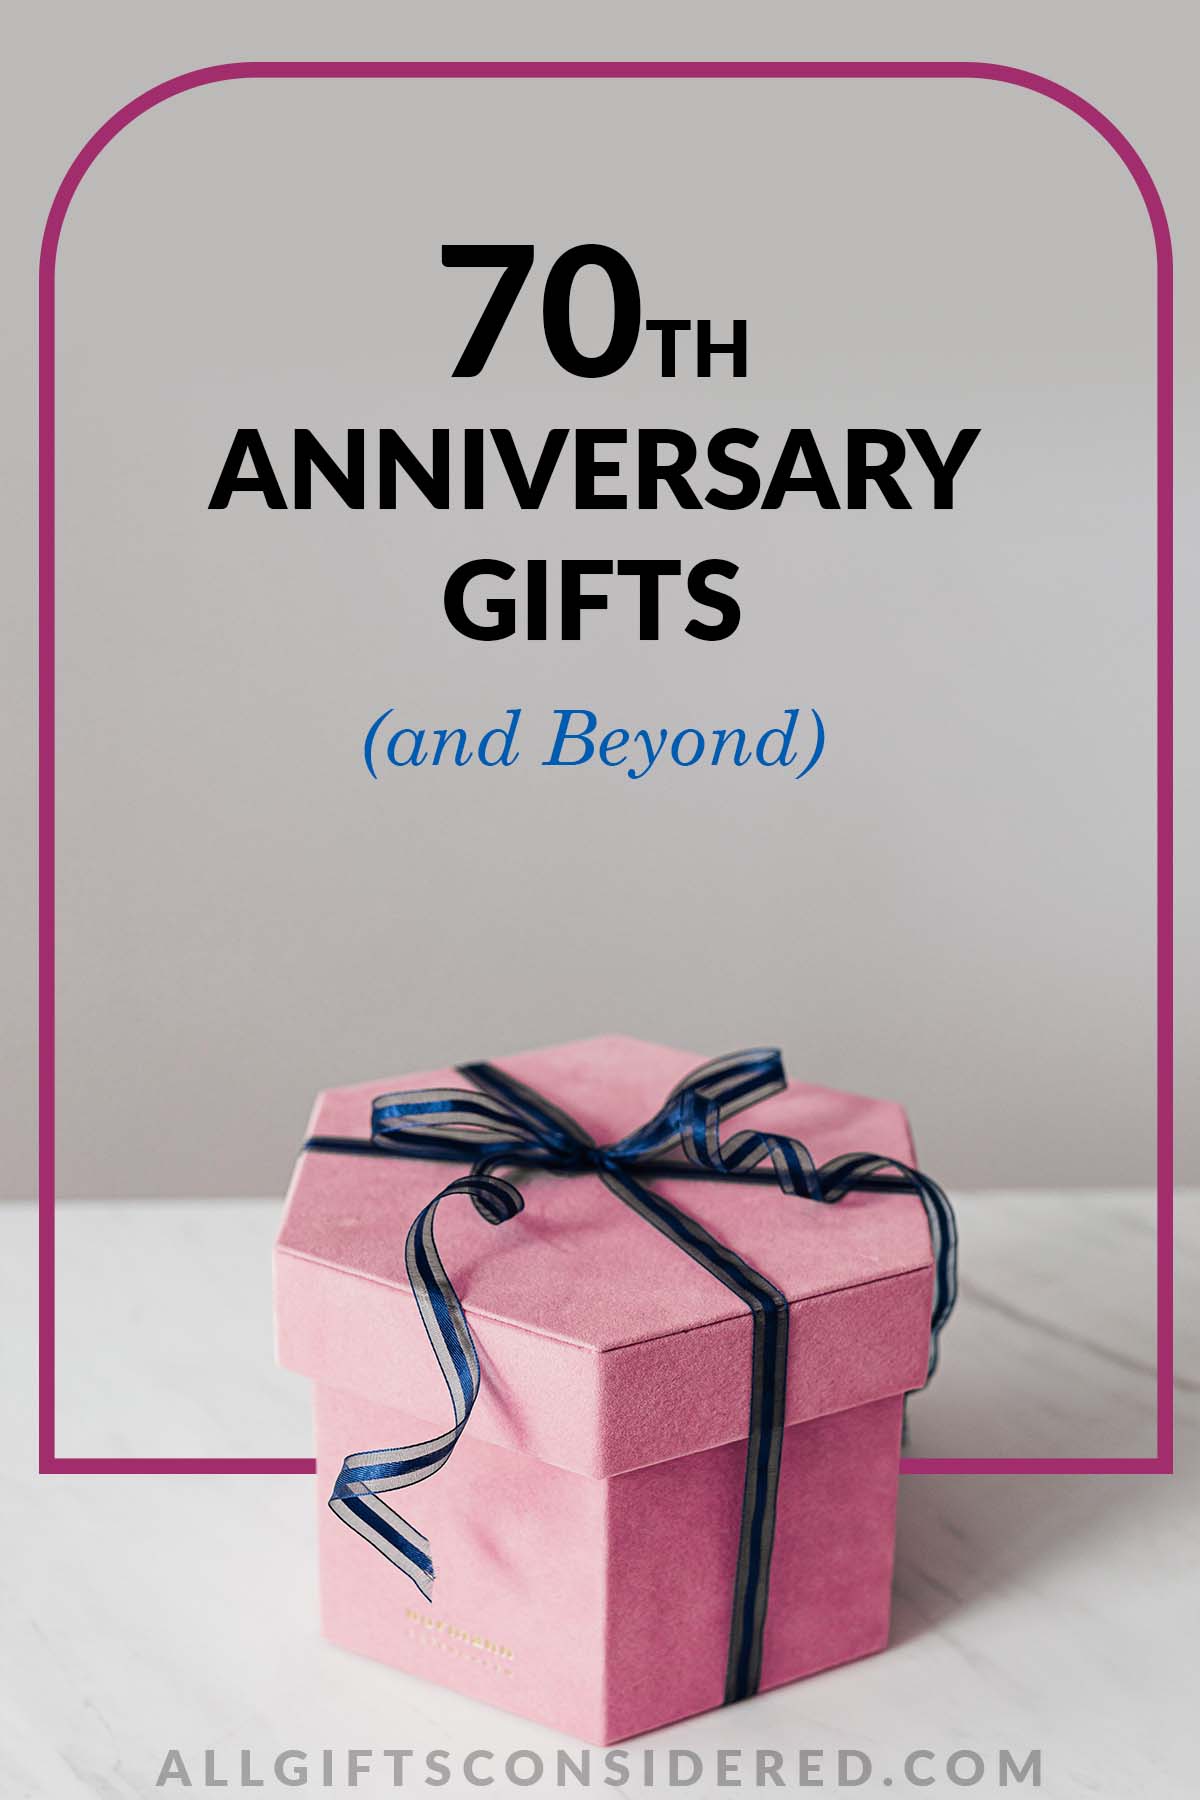 70th anniversary gifts- feature image